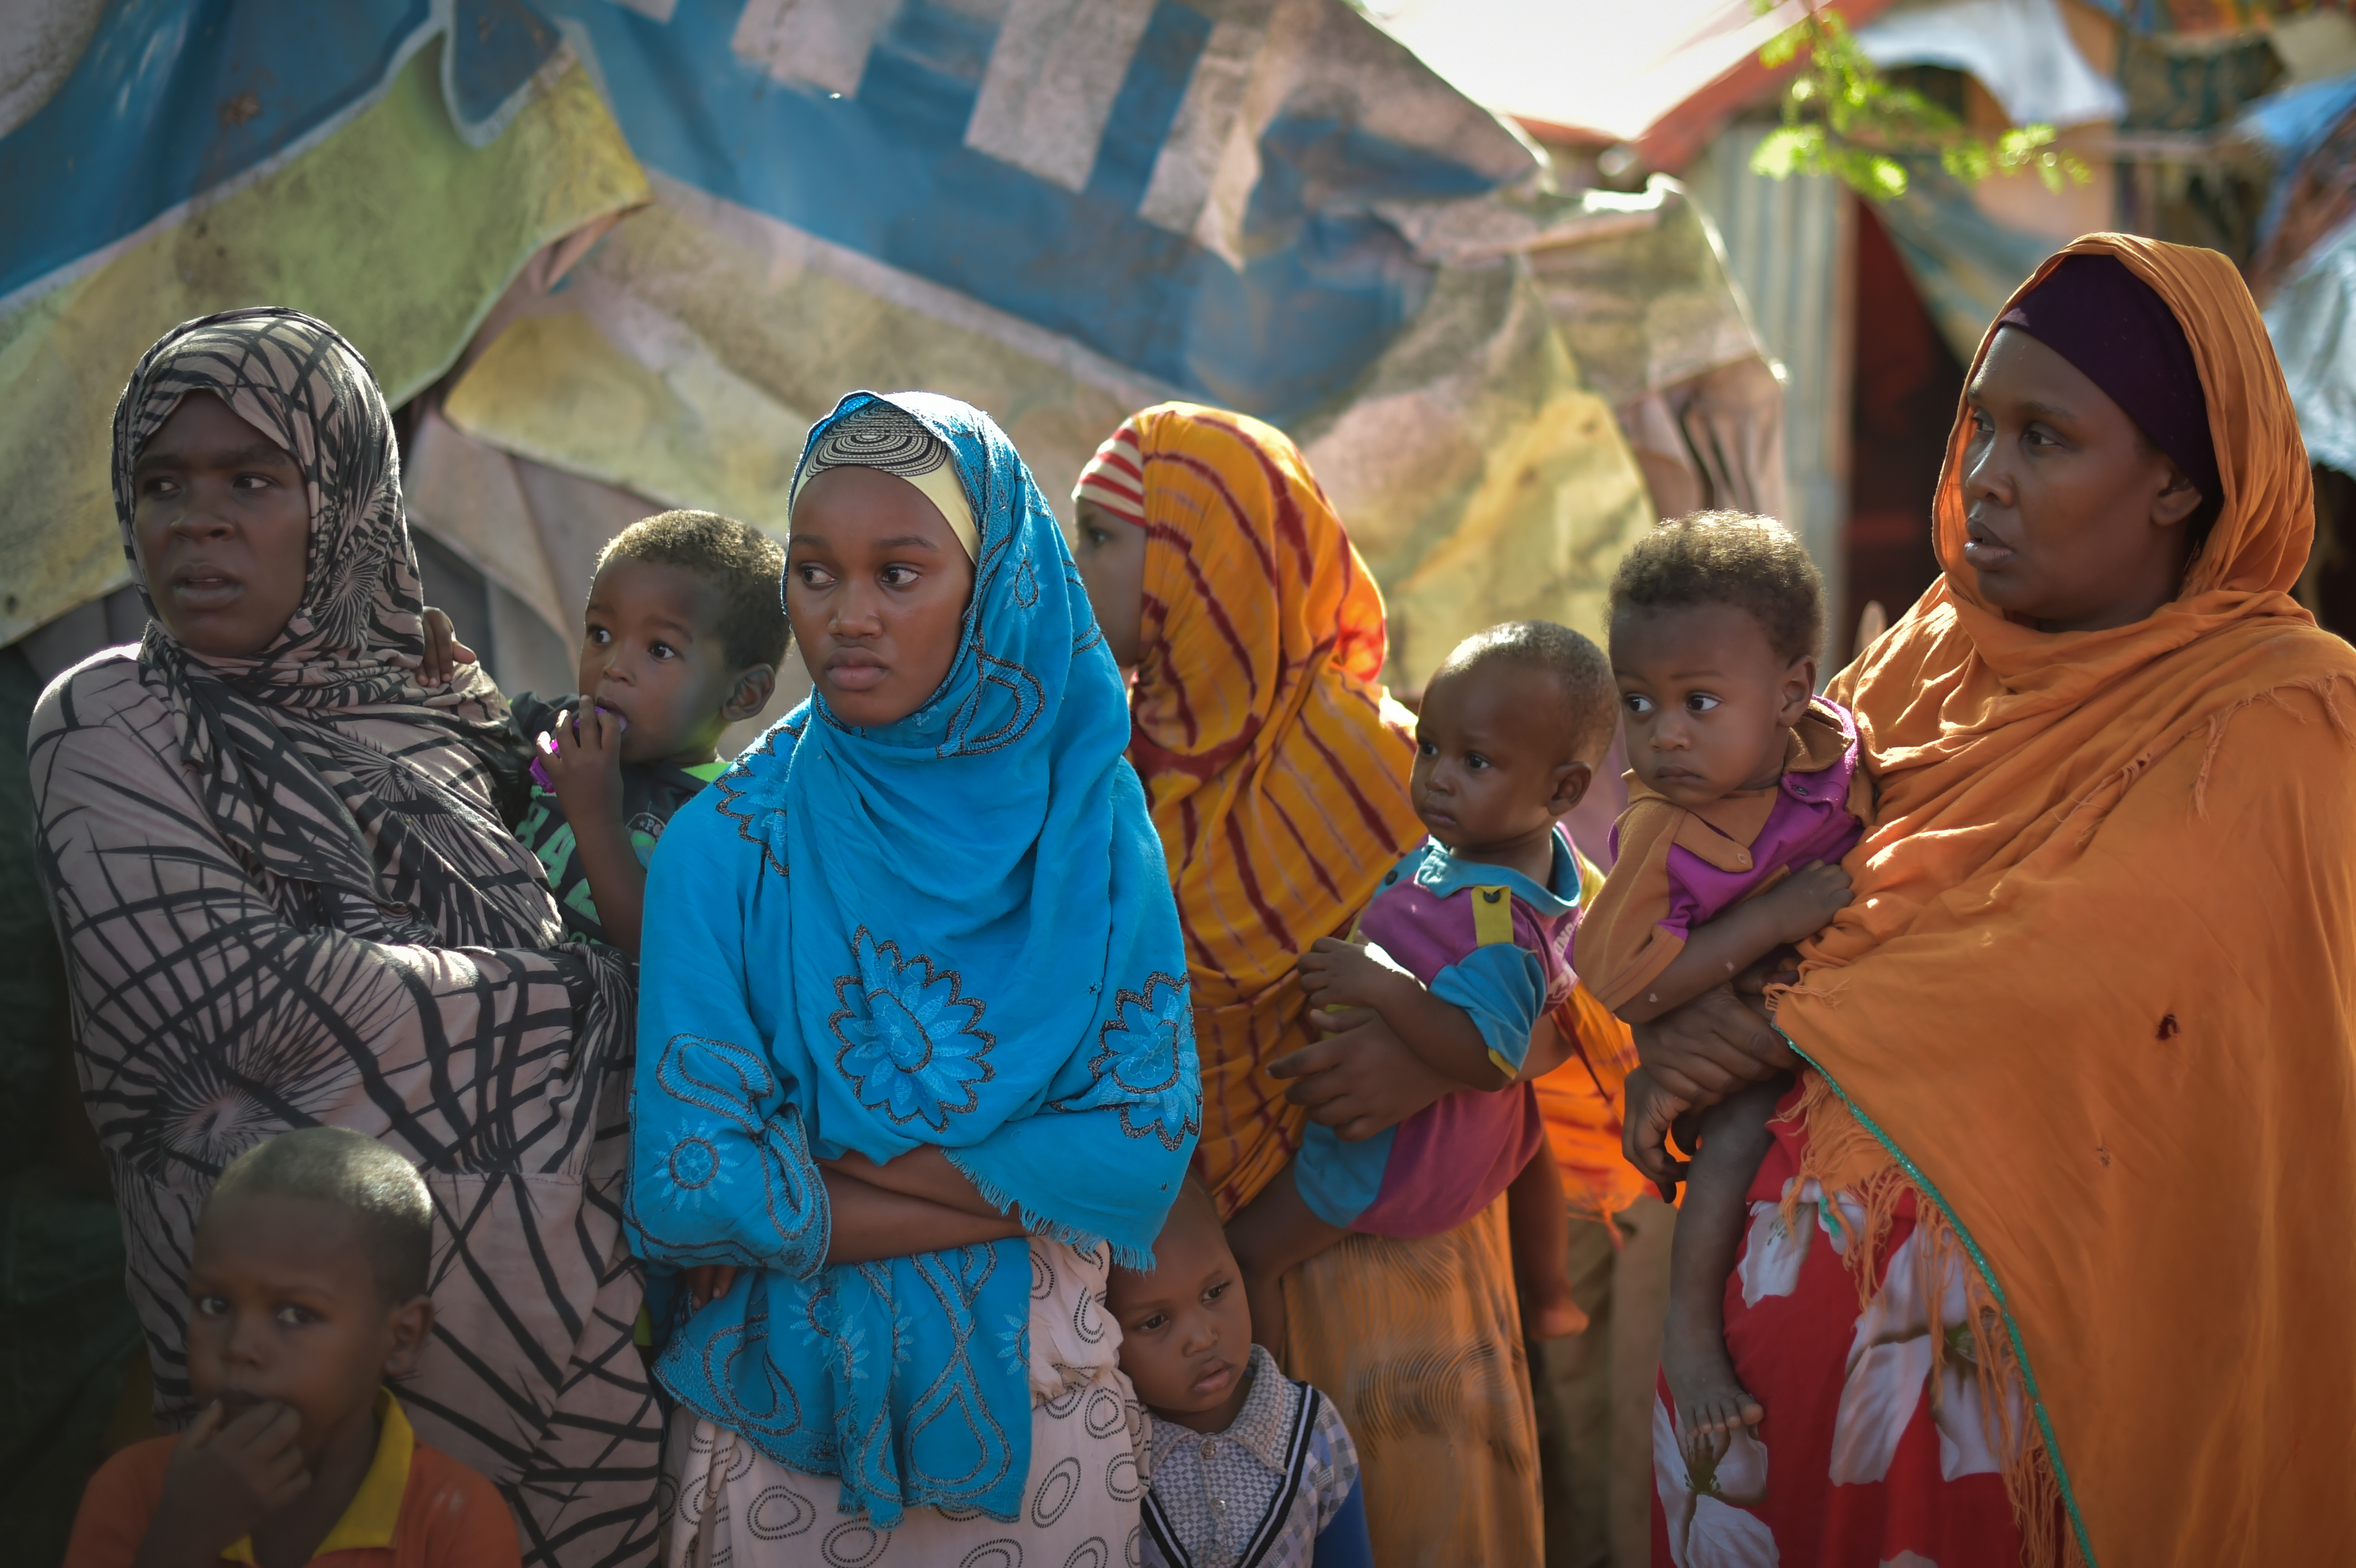 A group of Somali women stand near a water point at the Dayniile IDP camp on the outskirts of Mogadishu, Somalia, on March 6, 2017. UN Photo/Tobin Jones